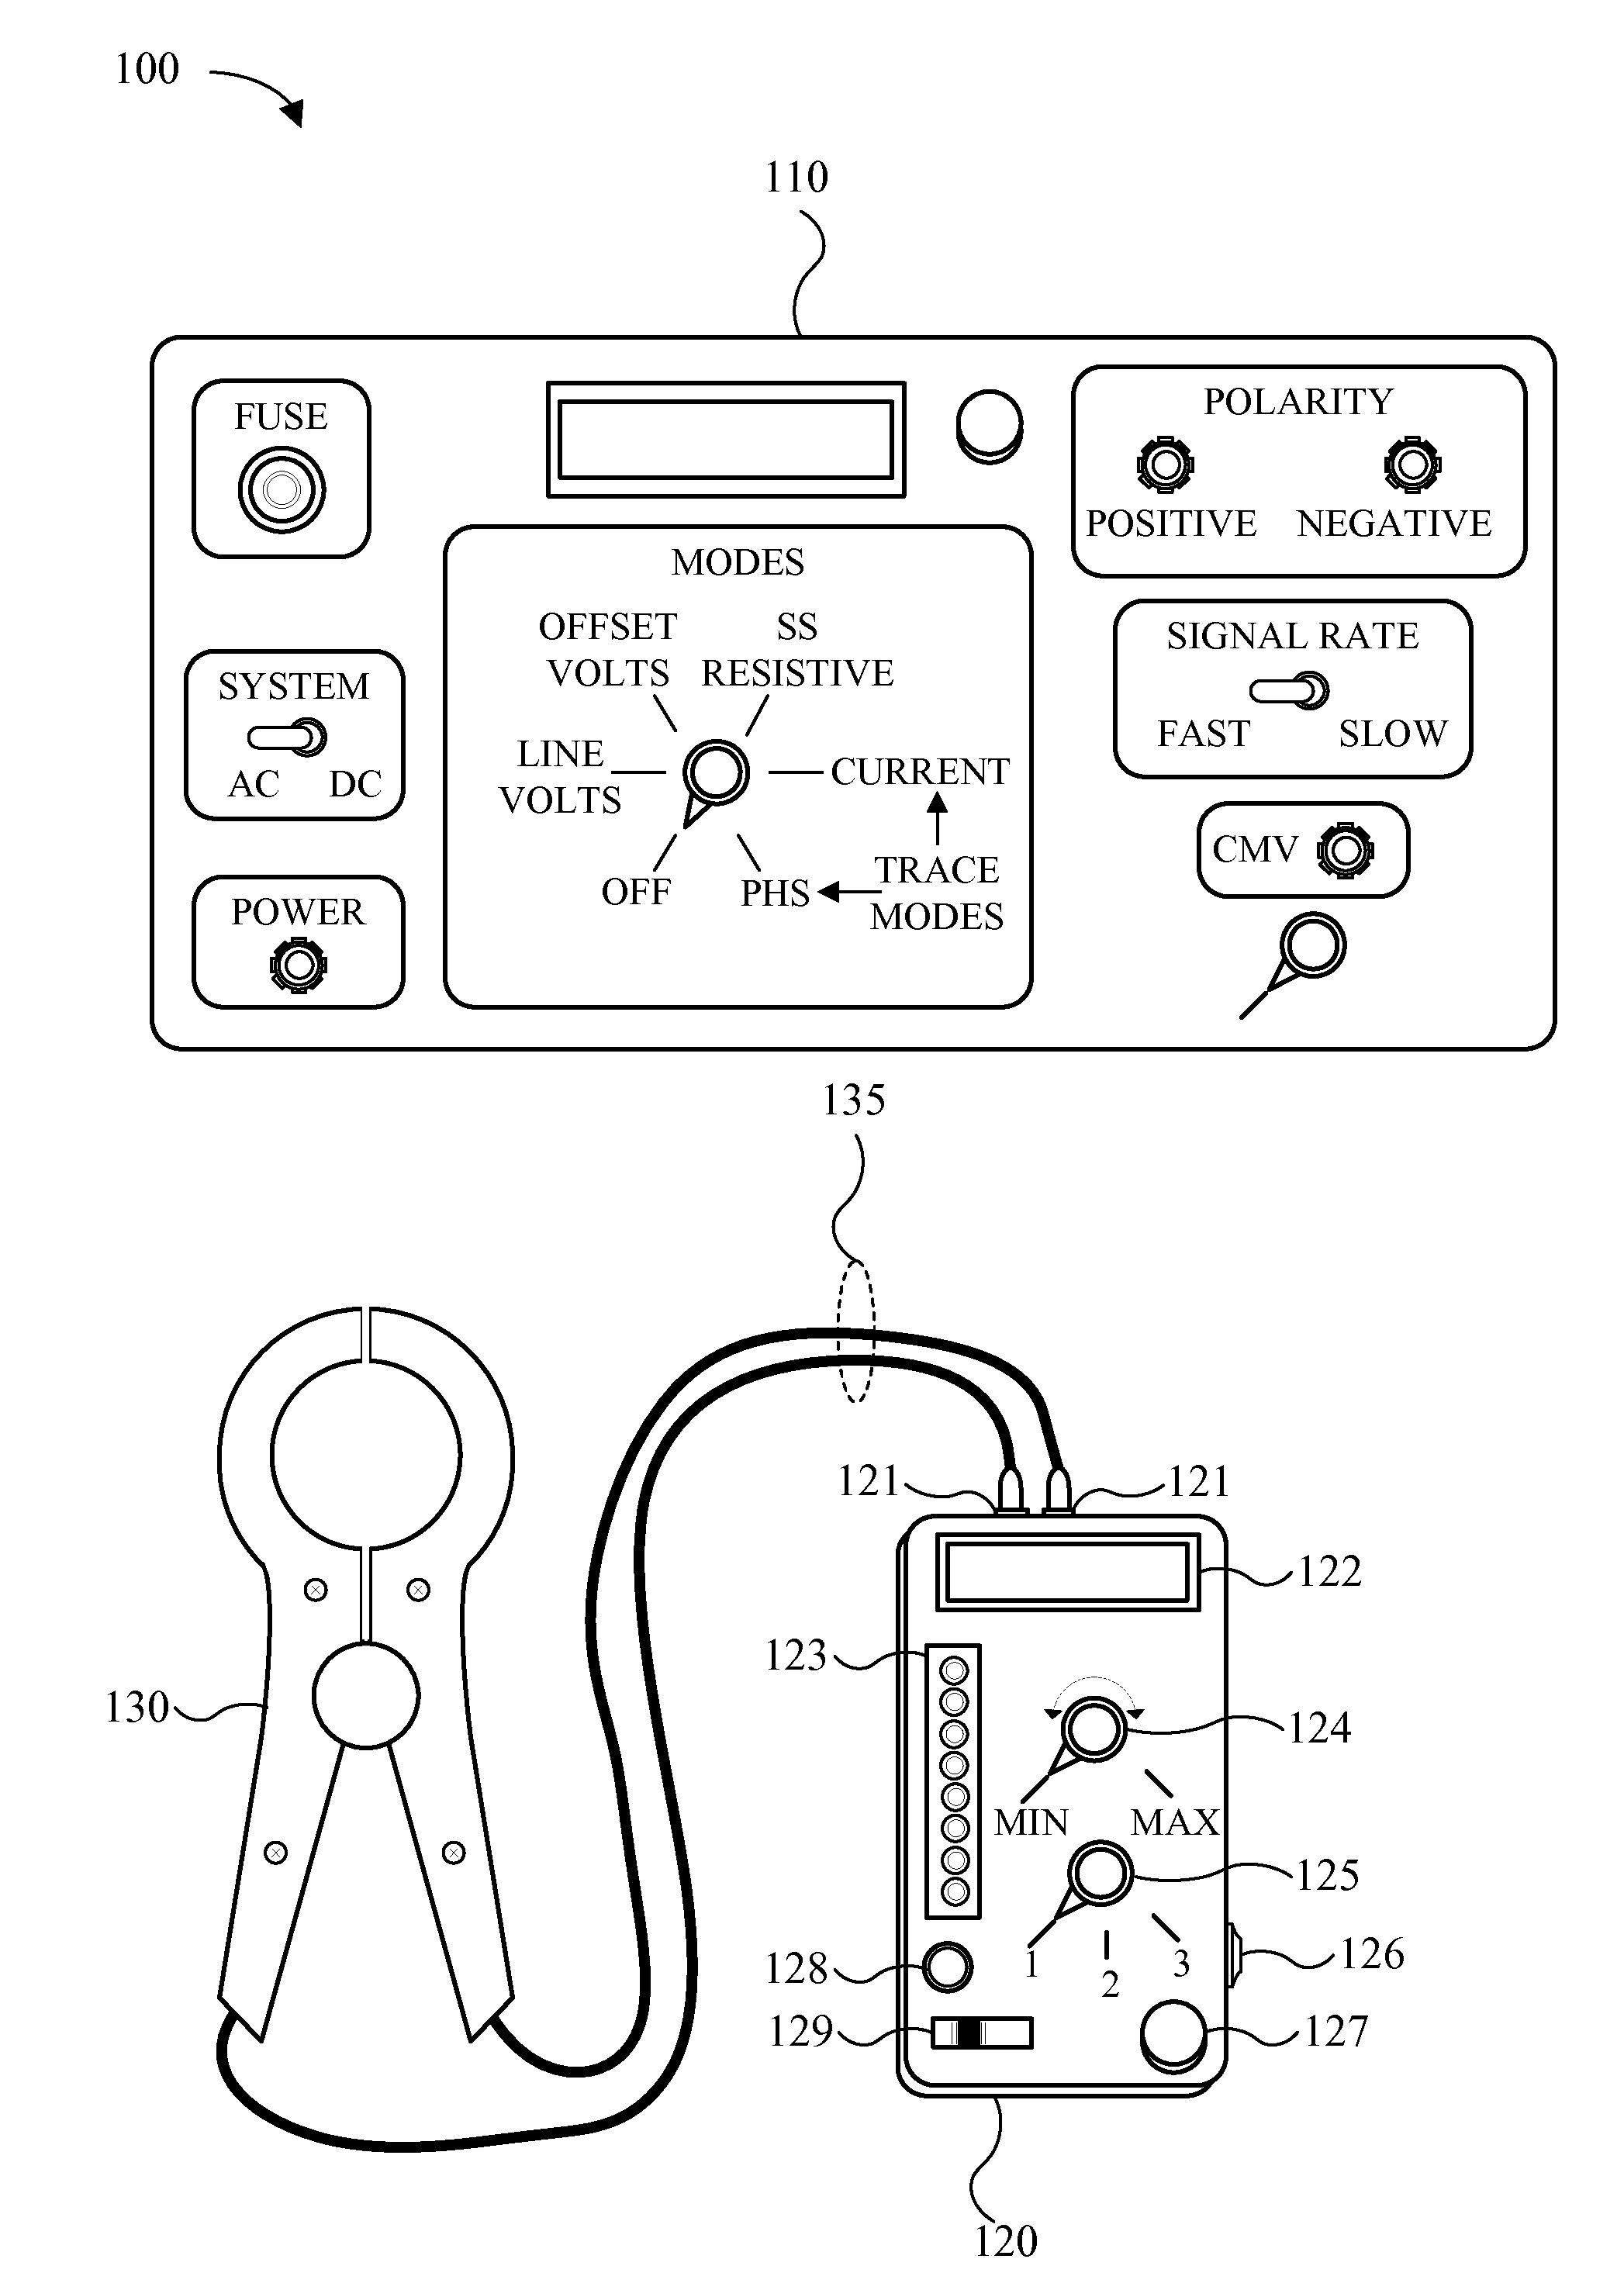 Apparatus and method for ground fault detection and location in electrical systems